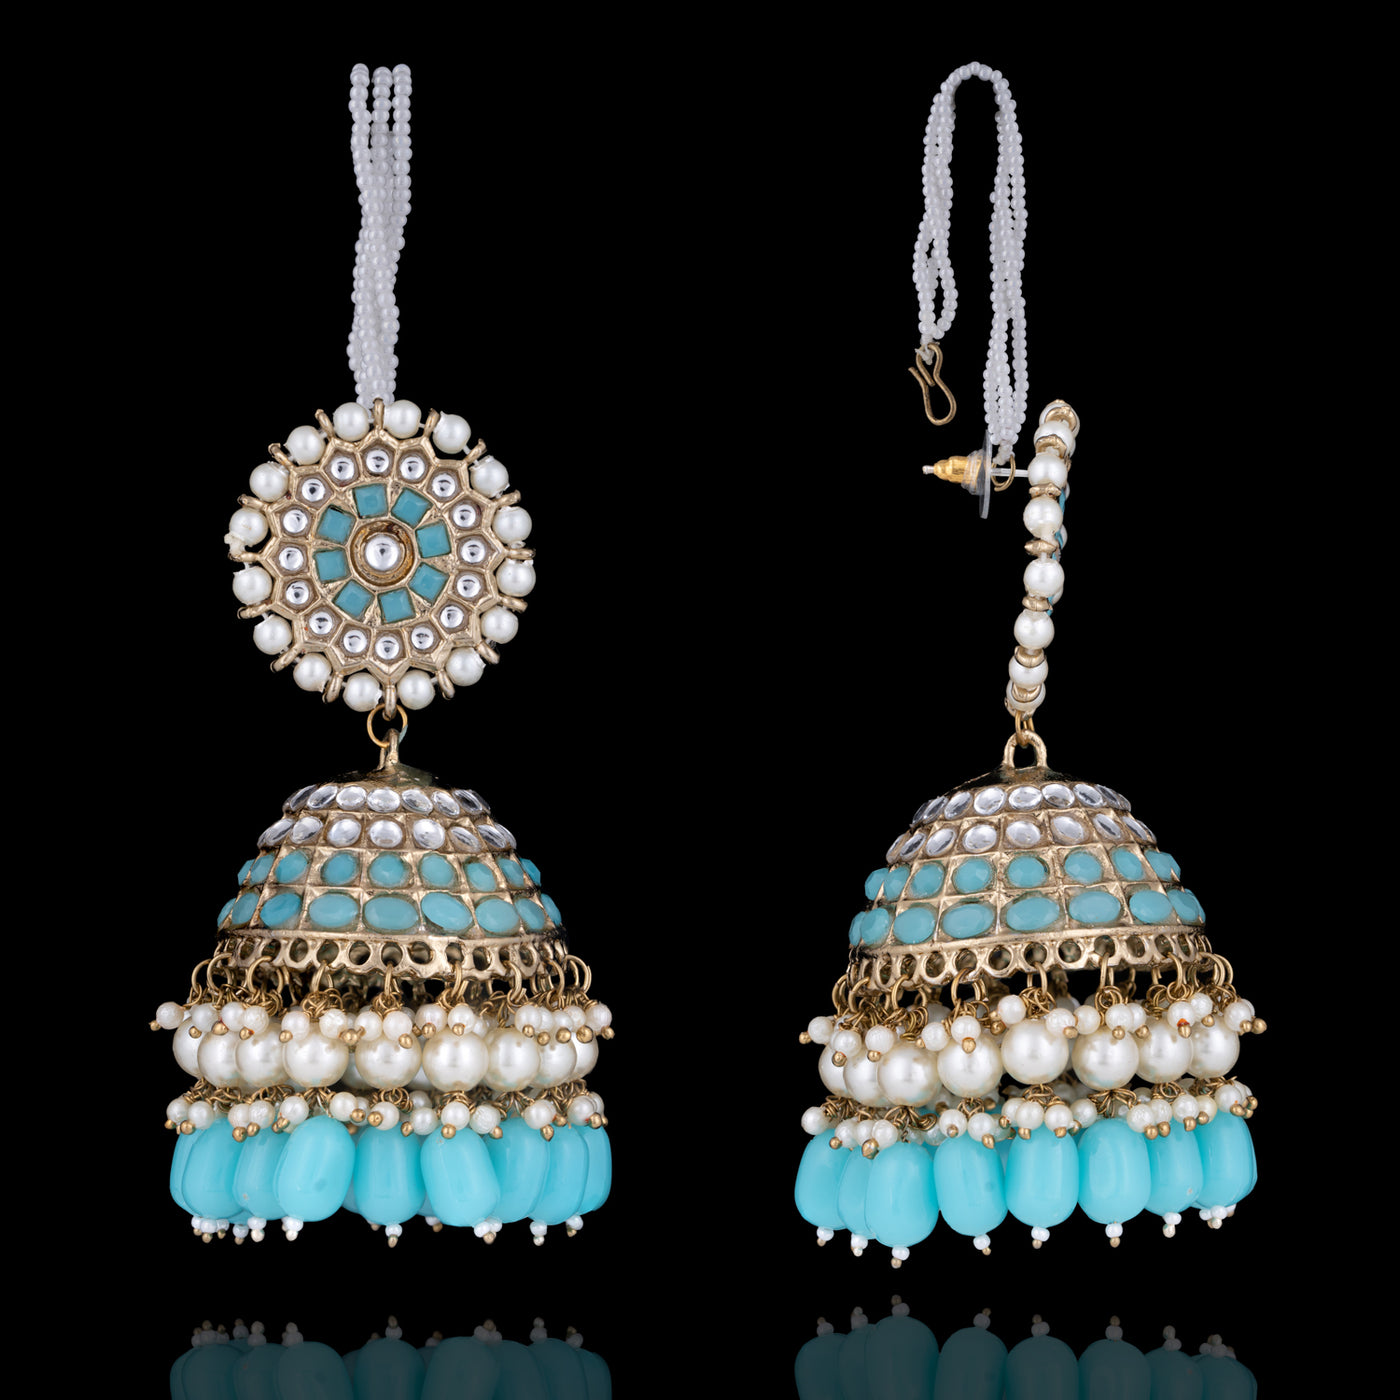 Ananya Earrings - Available in 2 Colors